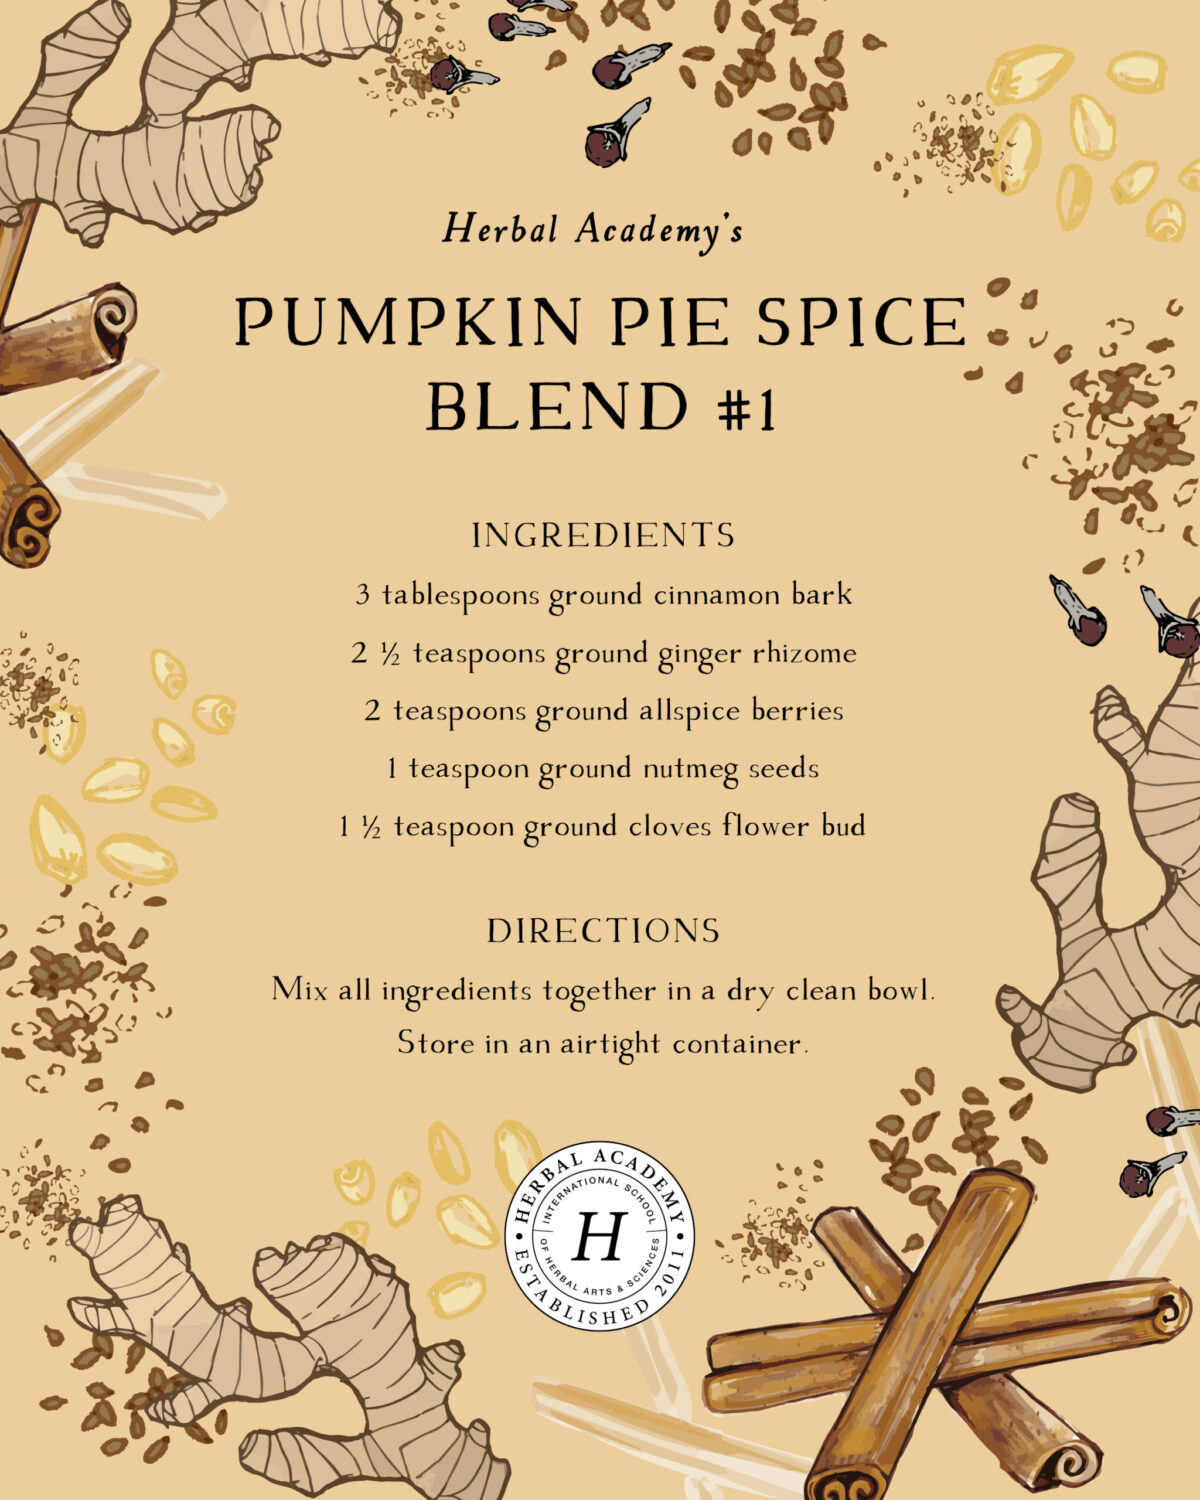 Make Your Own Apple and Pumpkin Pie Spice Blends | The Herbal Academy | Creating the best apple or pumpkin pie spice blend for your fall desserts is a simple matter of blending together common kitchen spices. 